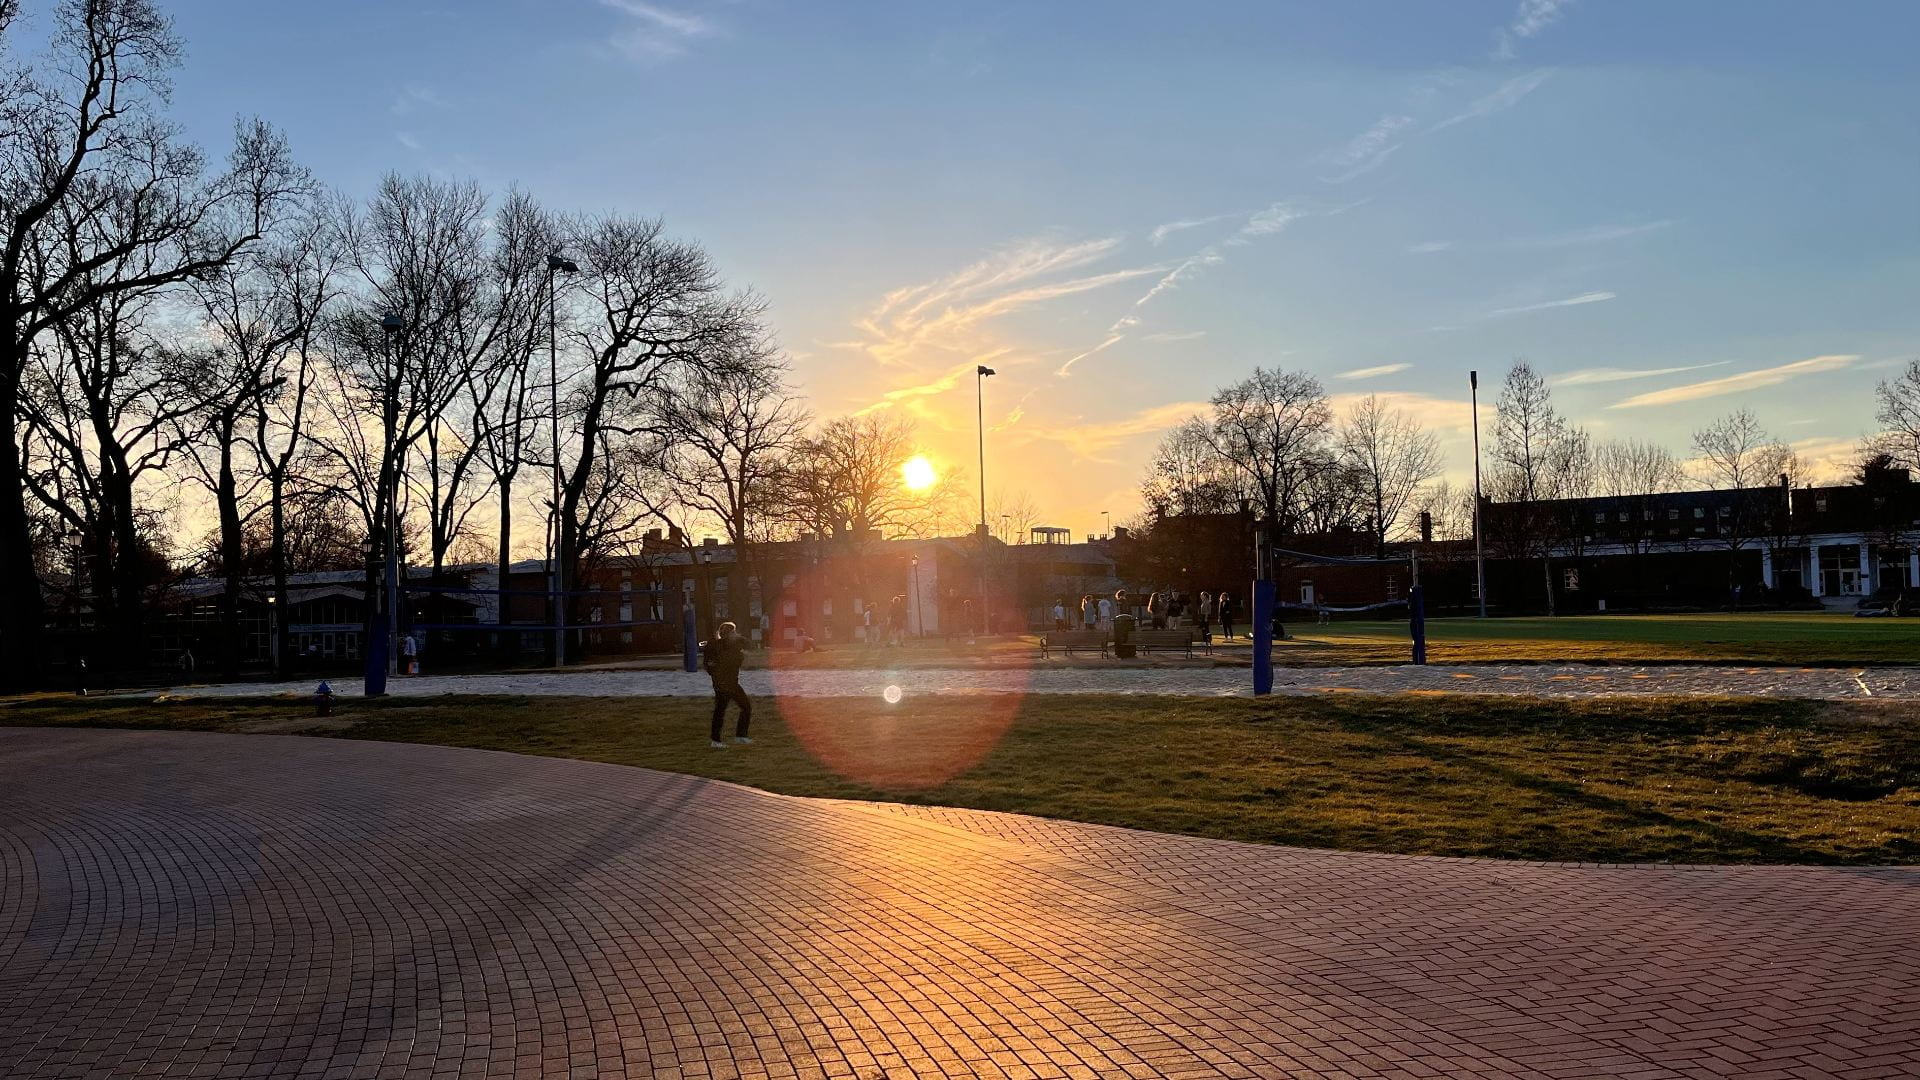 Picture of a sunset over the University of Delaware campus during the winter